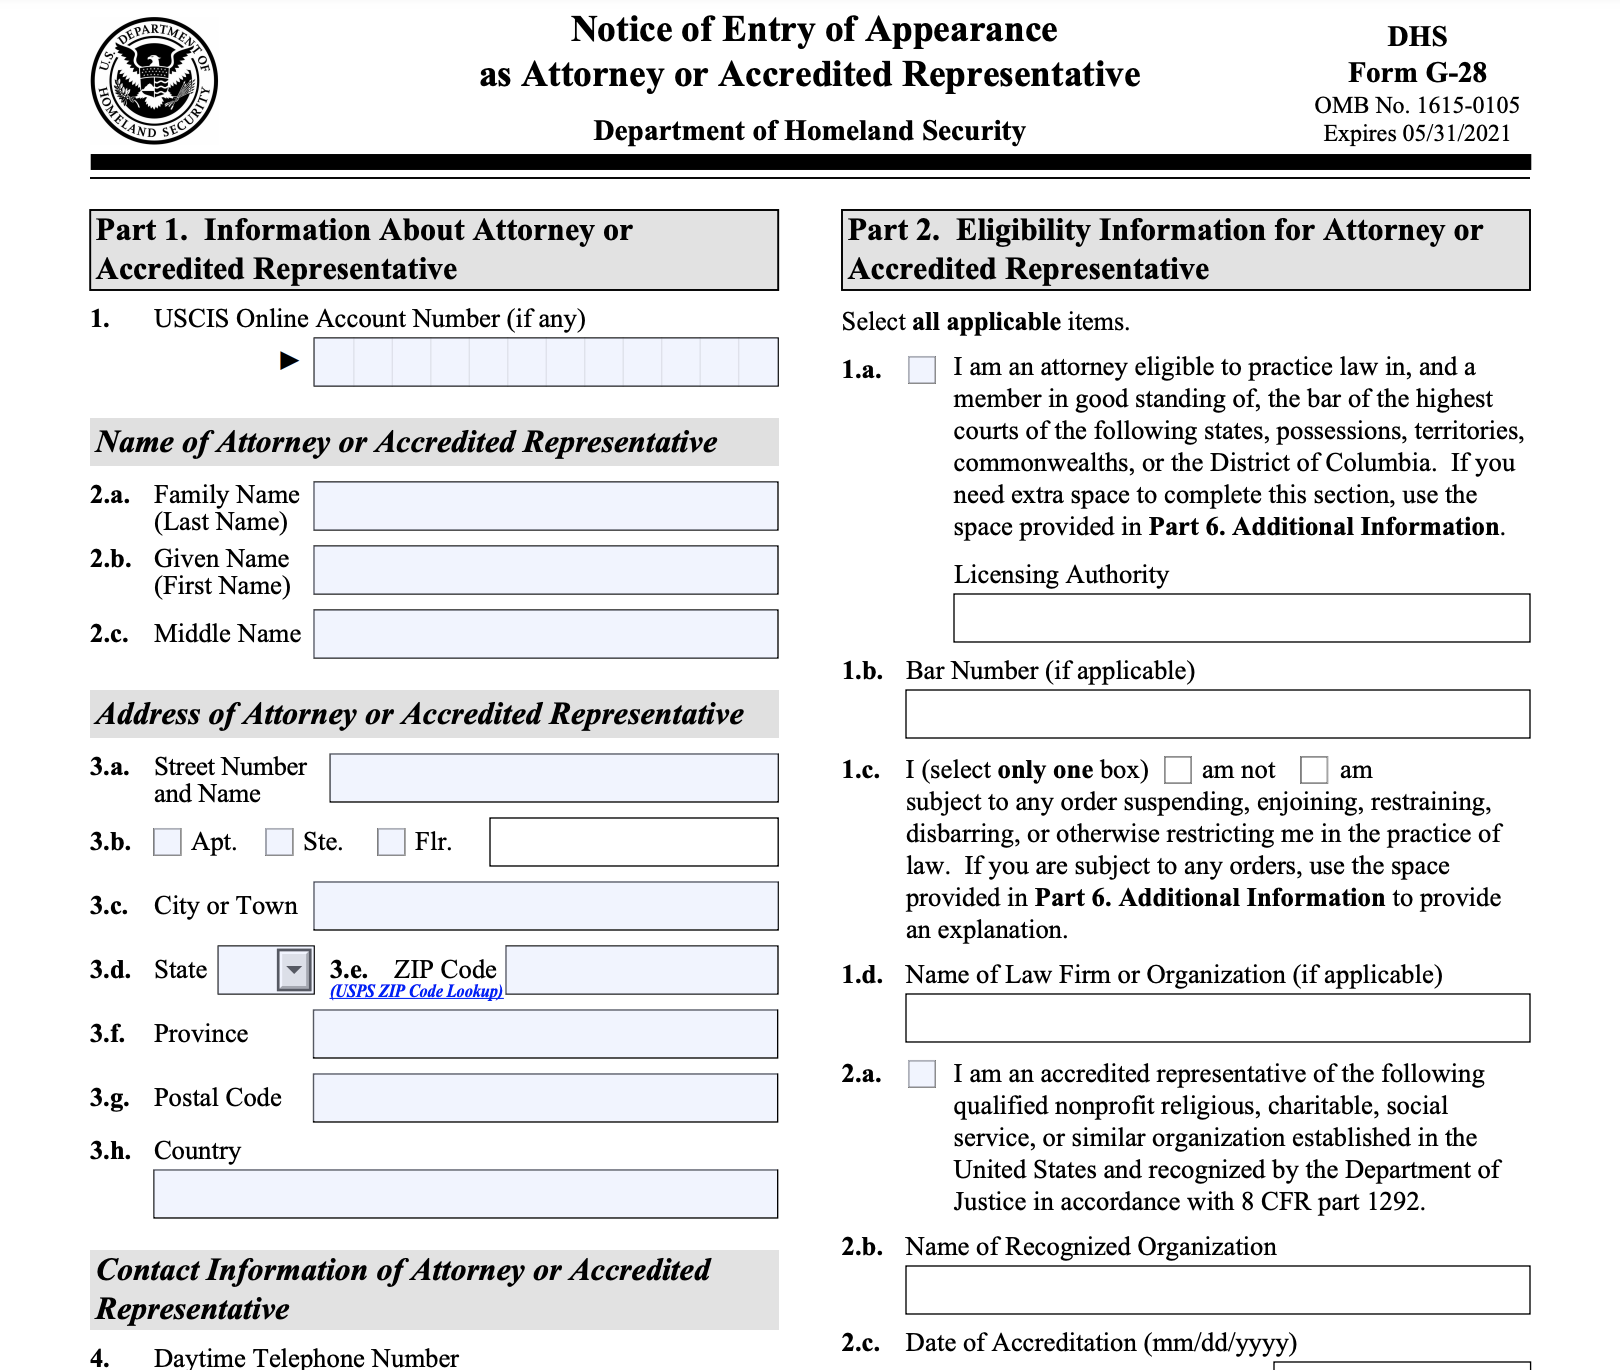 Complete Guide To Form G 28 Notice Of Entry Of Appearance As Attorney